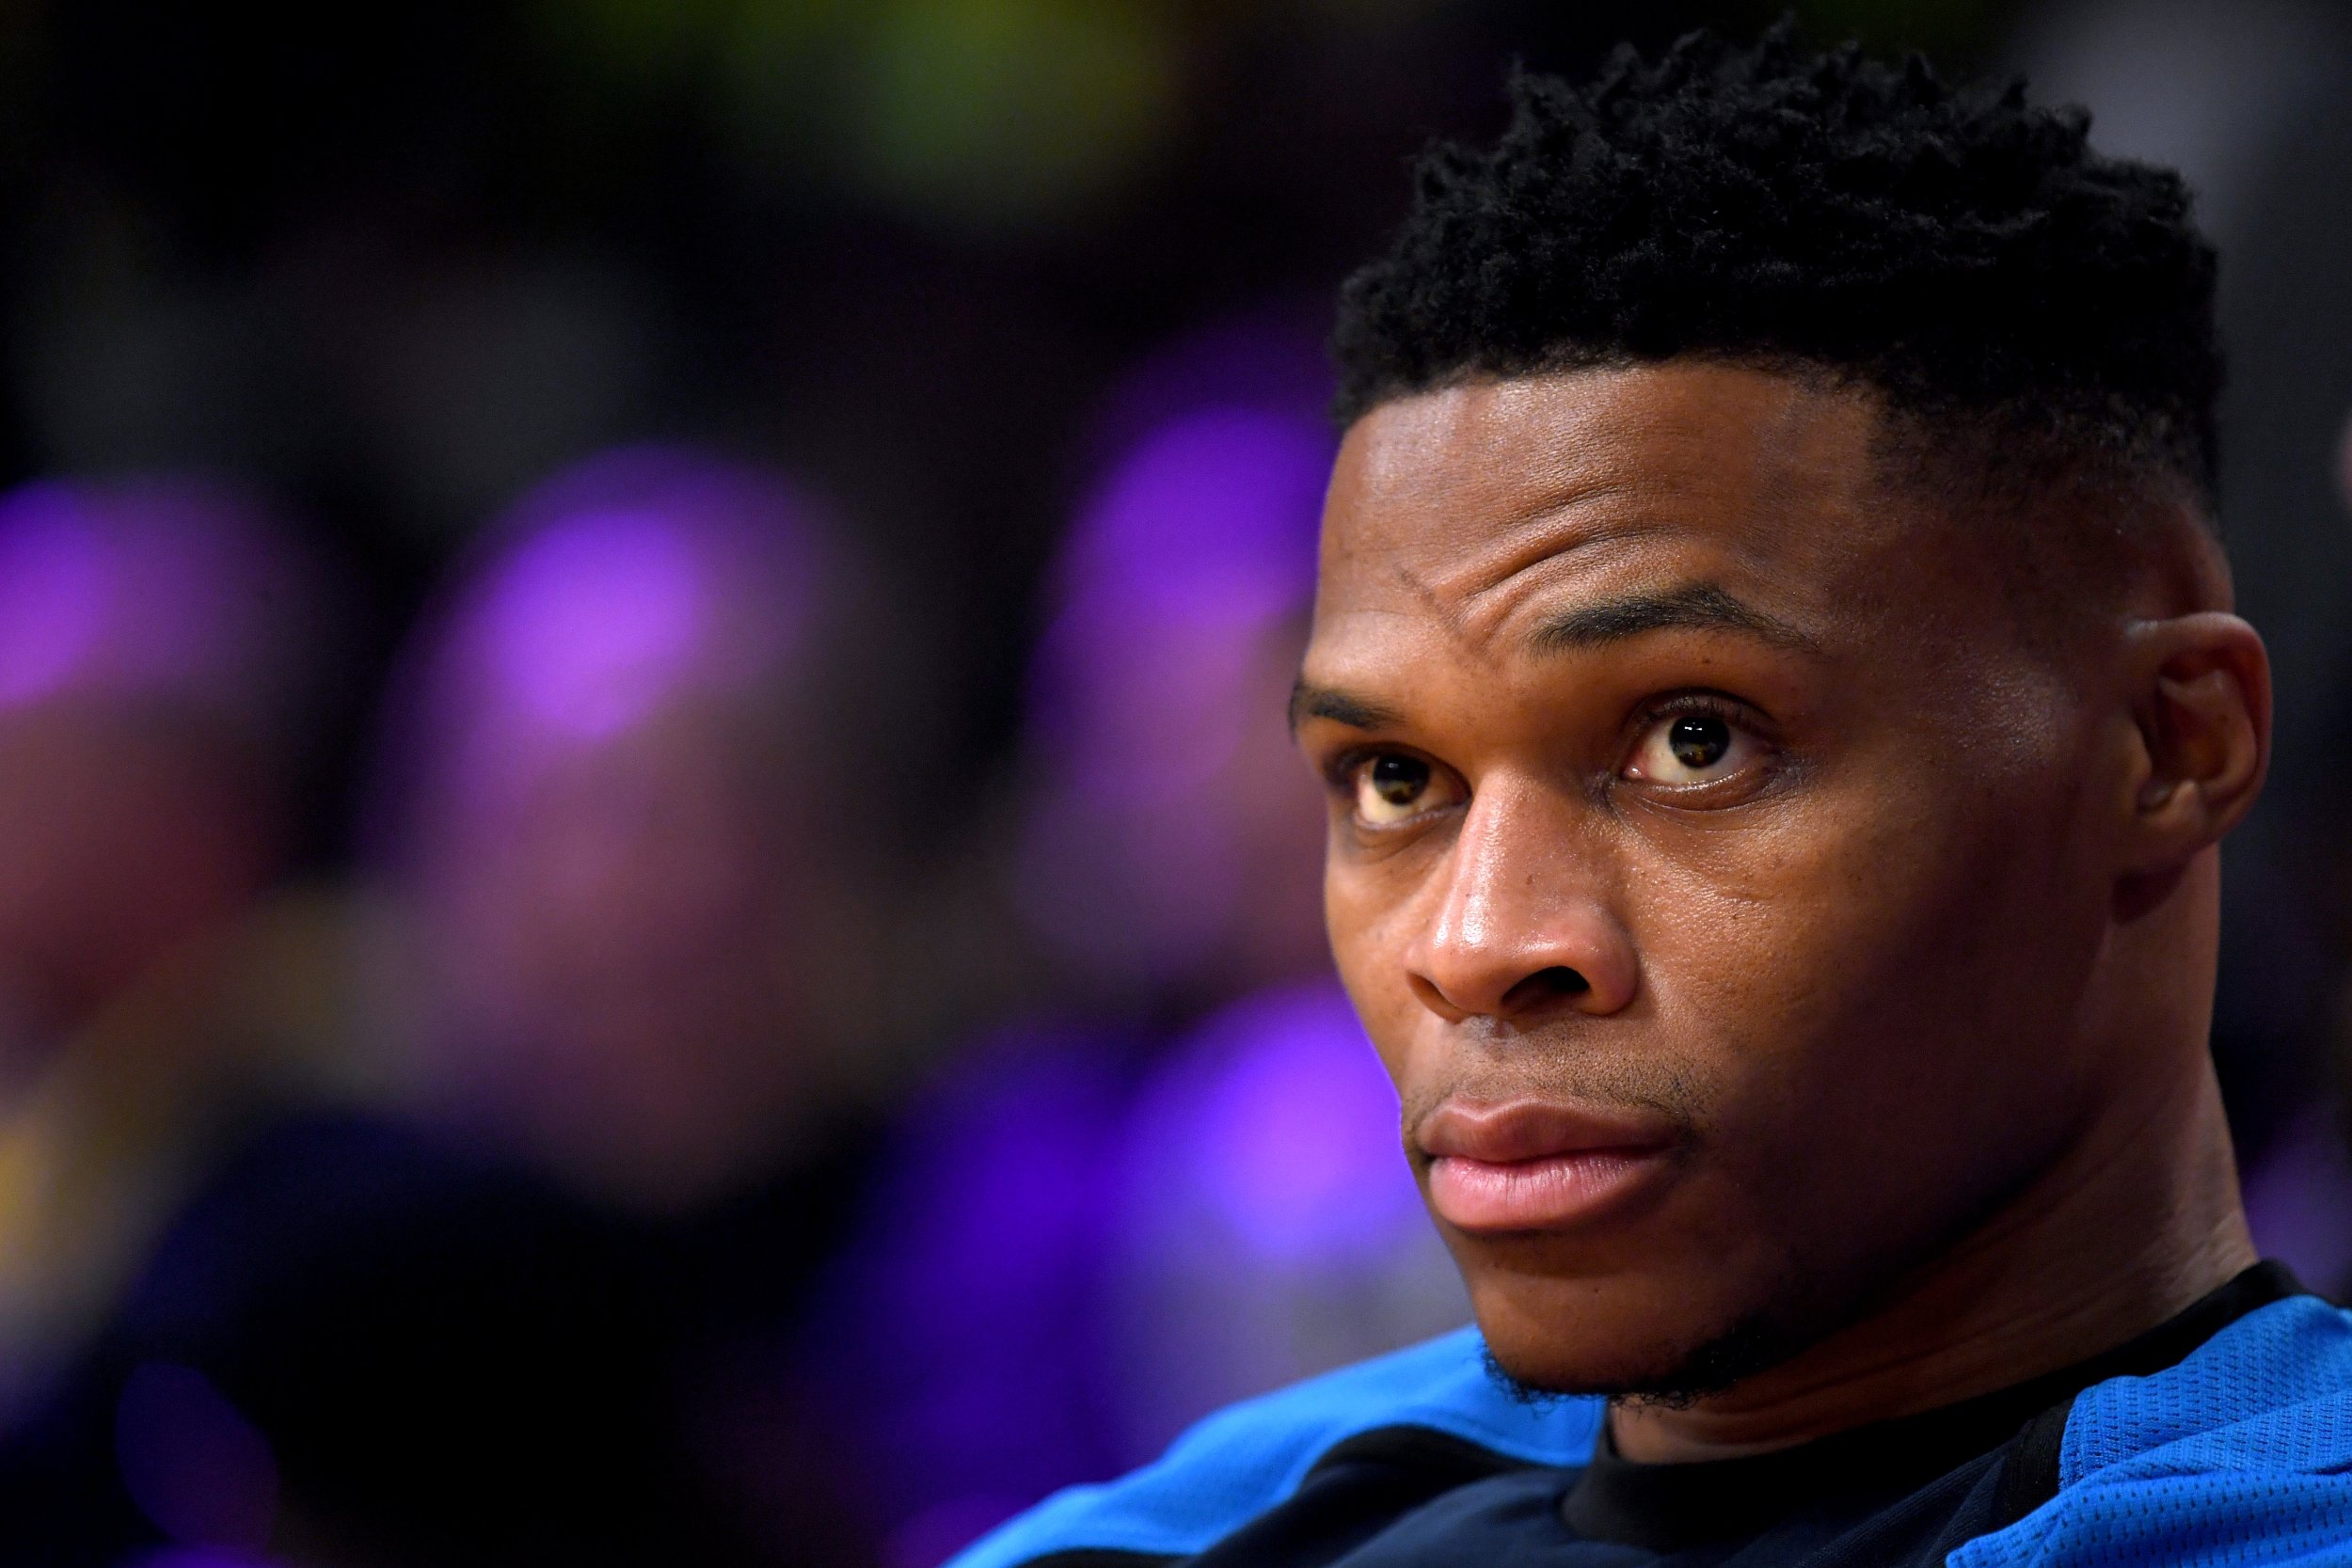 Russell Westbrook Net Worth Rockets Star Spends 350,000 A Year On